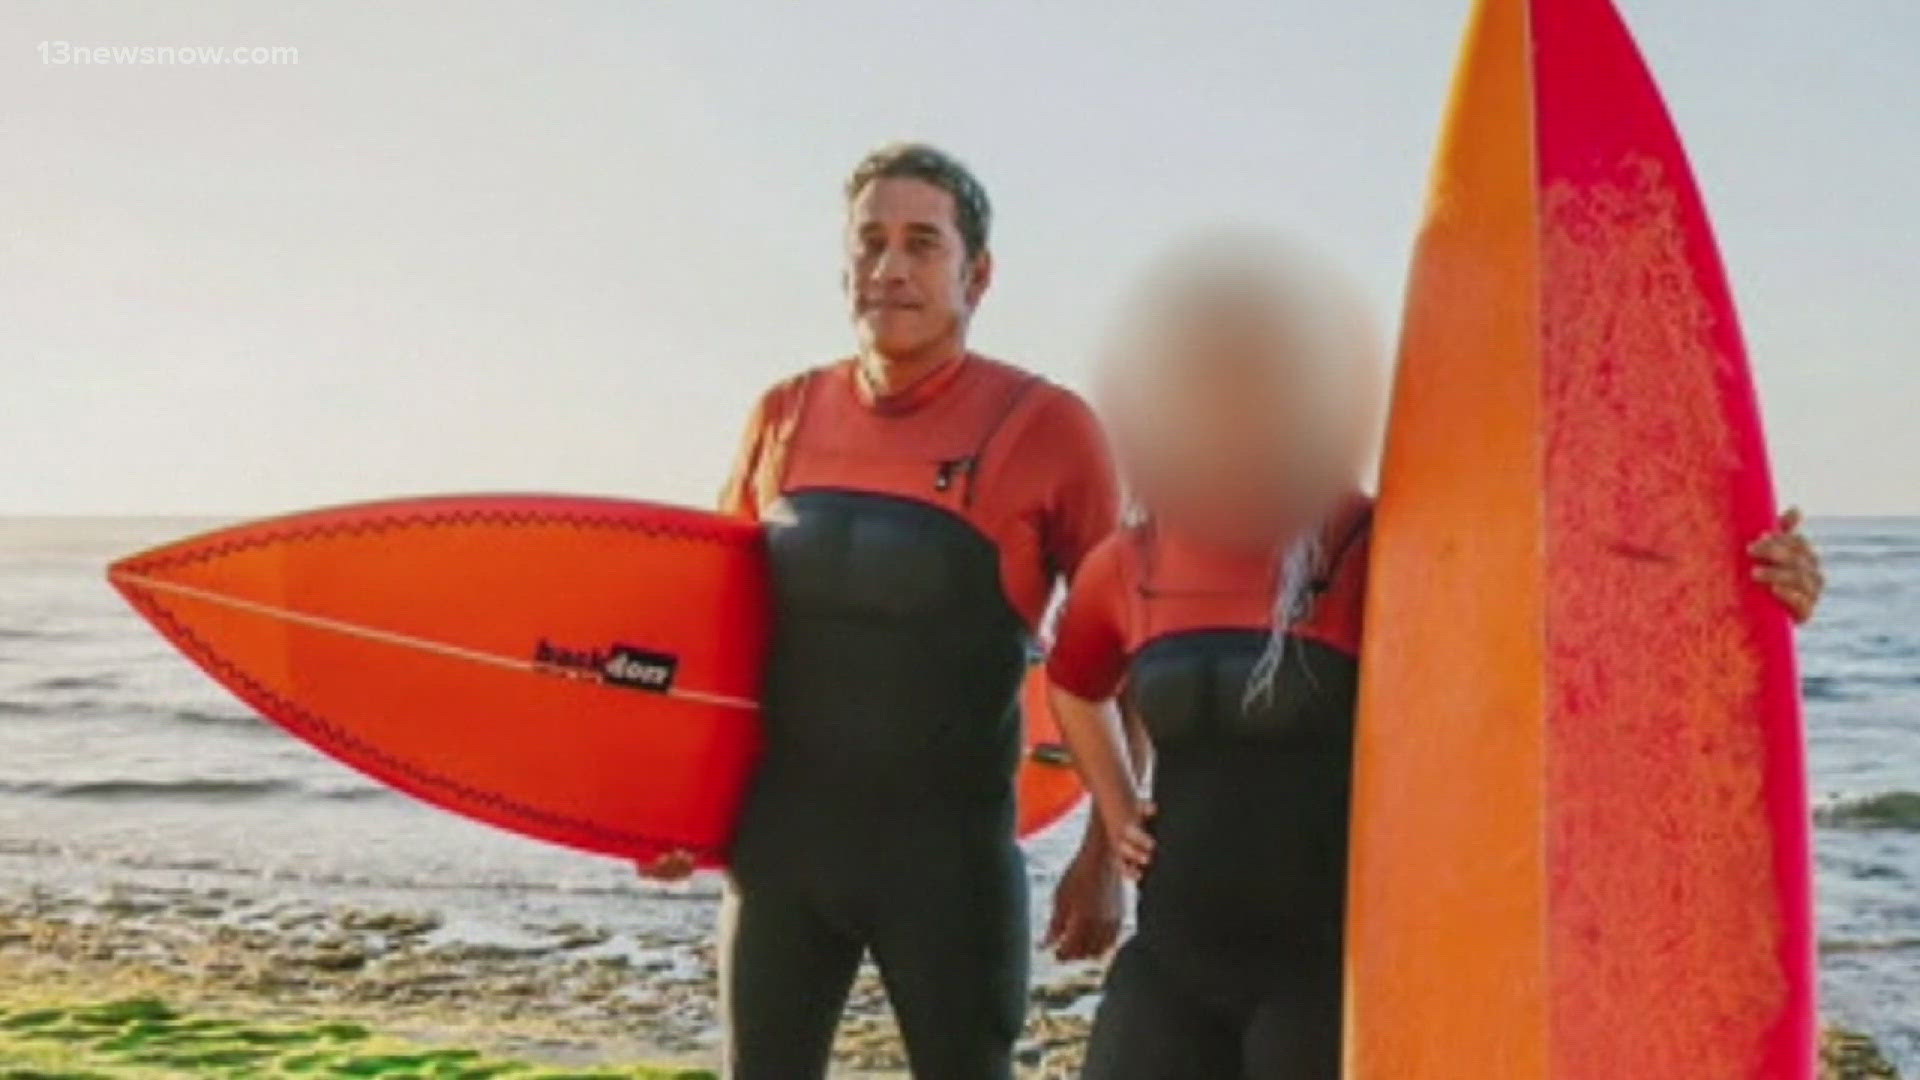 Fourty-nine-year-old Tamayo Perry, a surfer who gained fame as a lifeguard and actor, has died following a shark attack.